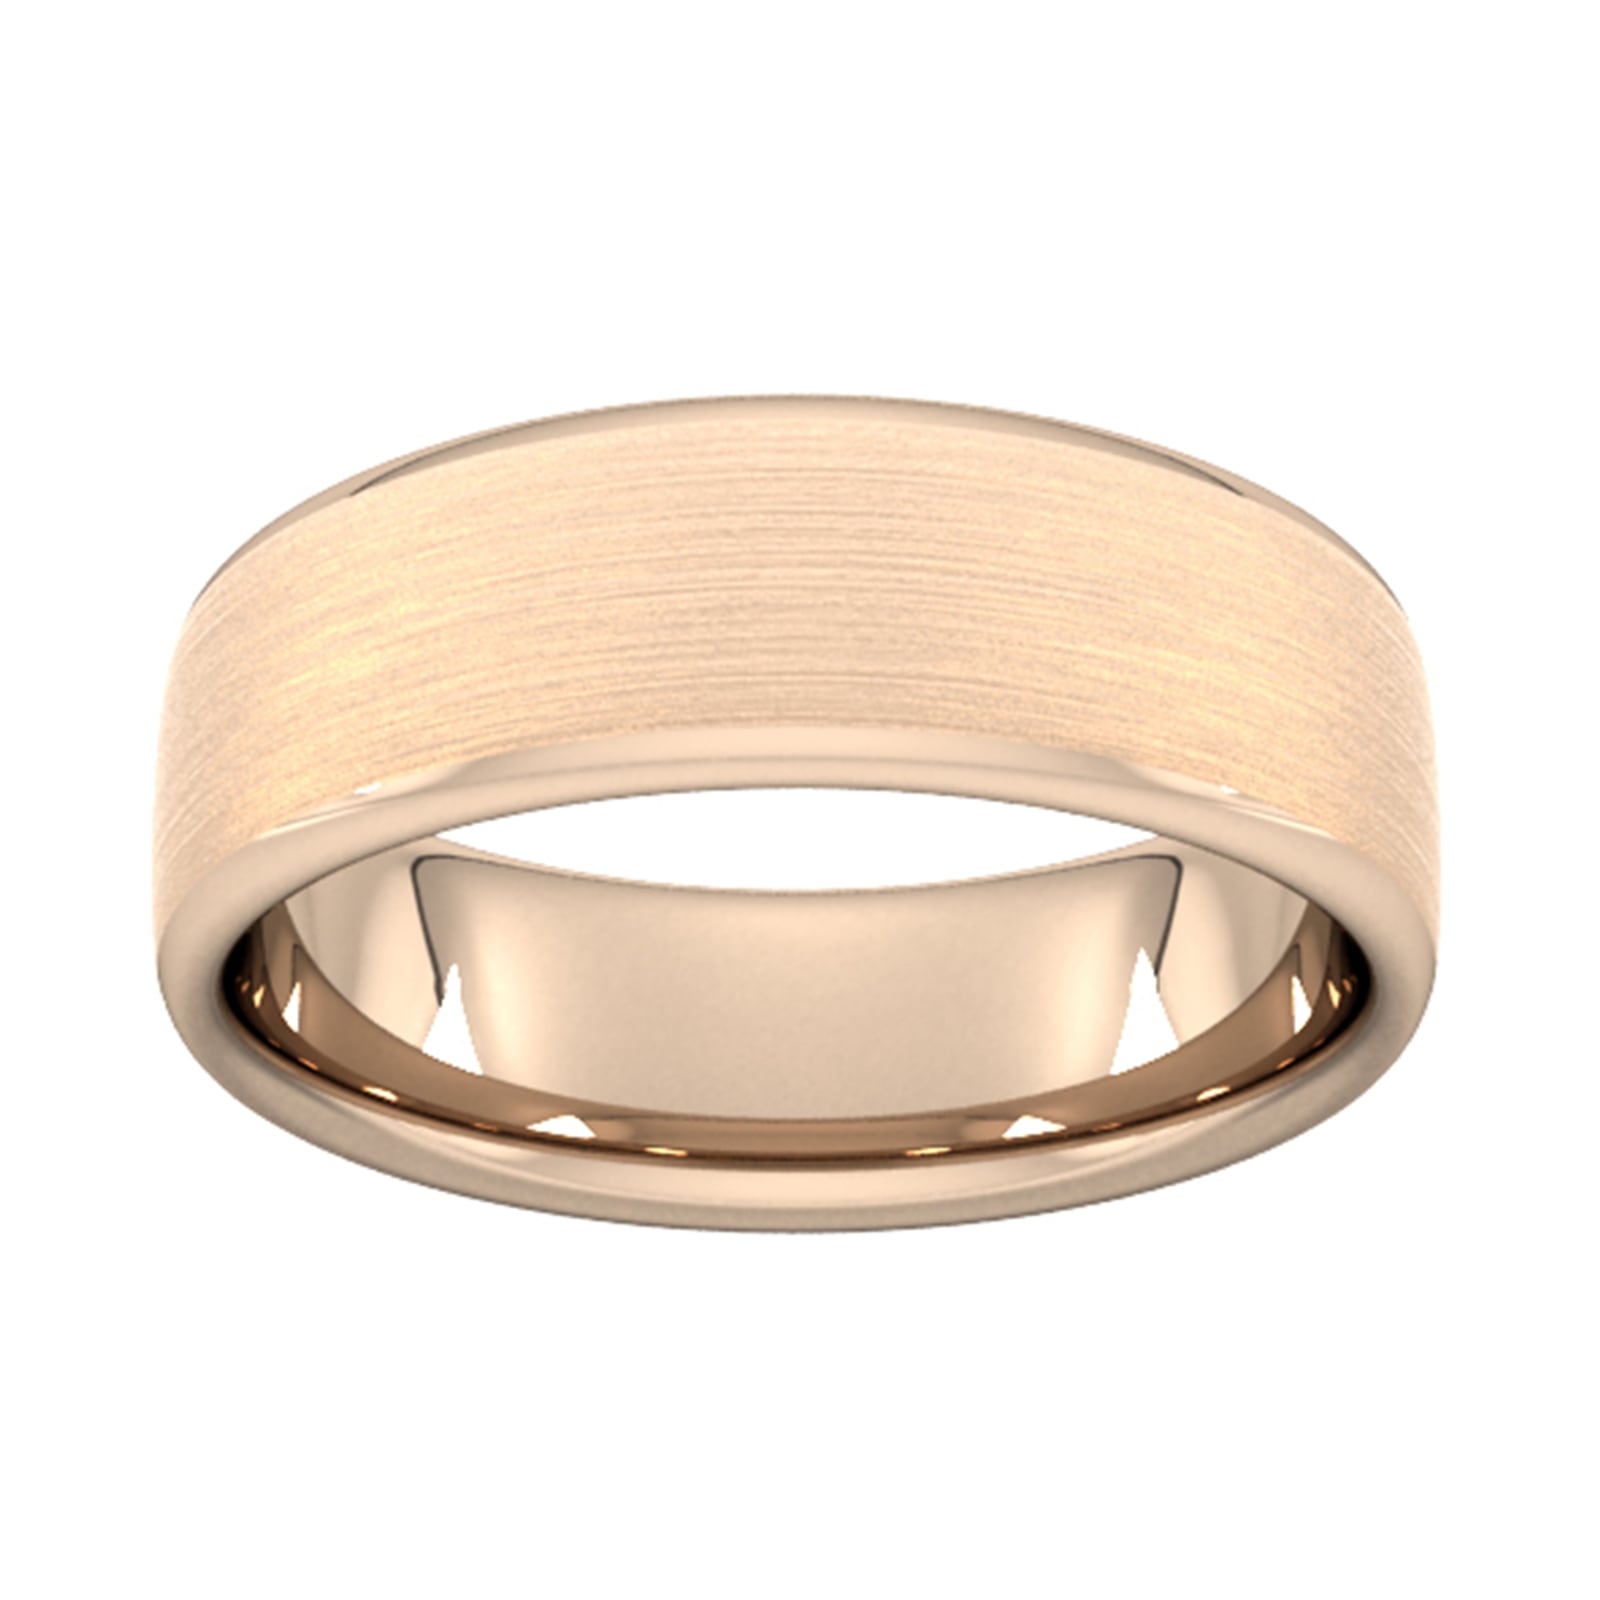 7mm D Shape Heavy Matt Finished Wedding Ring In 9 Carat Rose Gold - Ring Size H